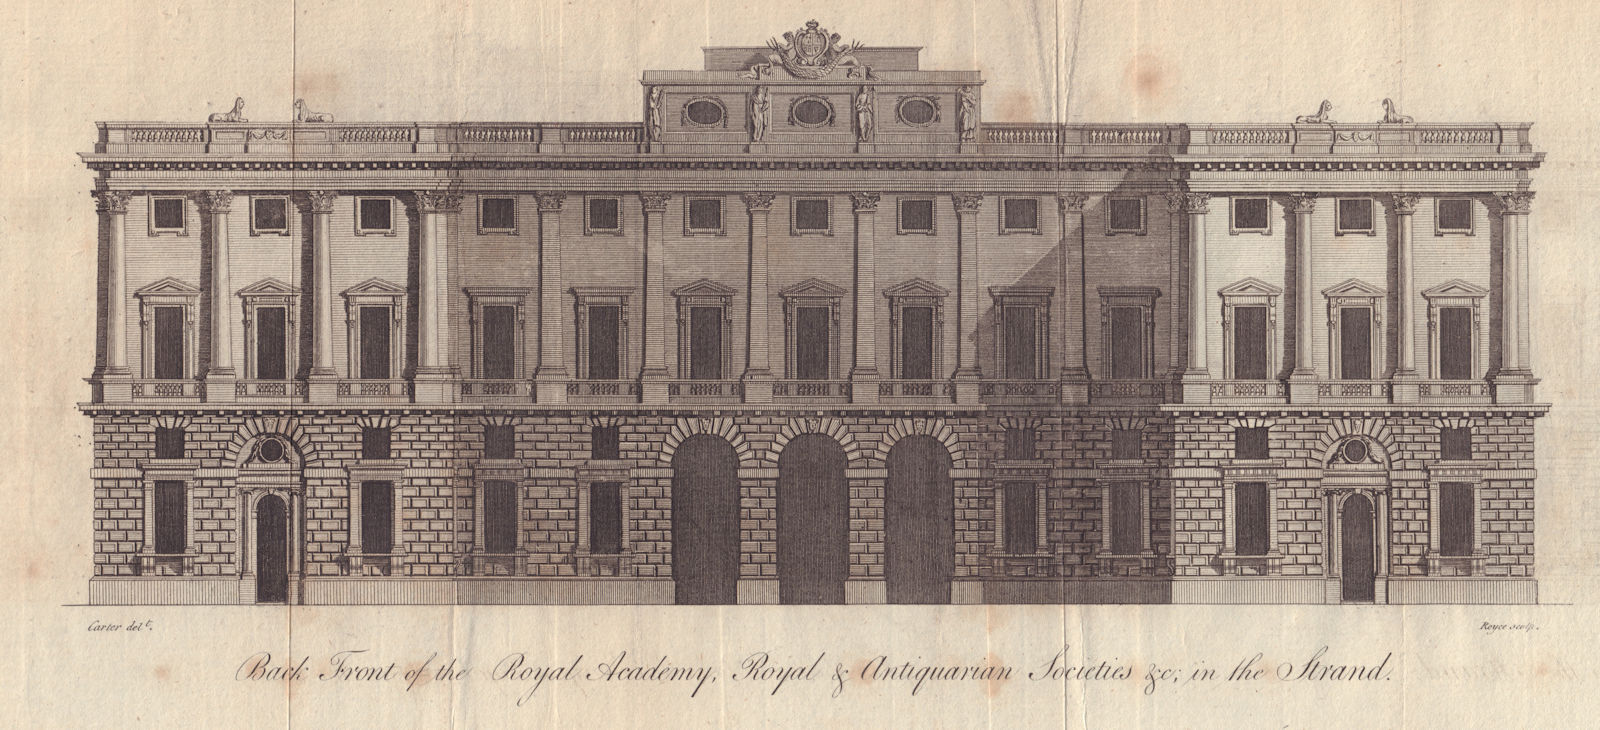 Back Front of the Royal Academy… in the Strand. Somerset House 1779 old print